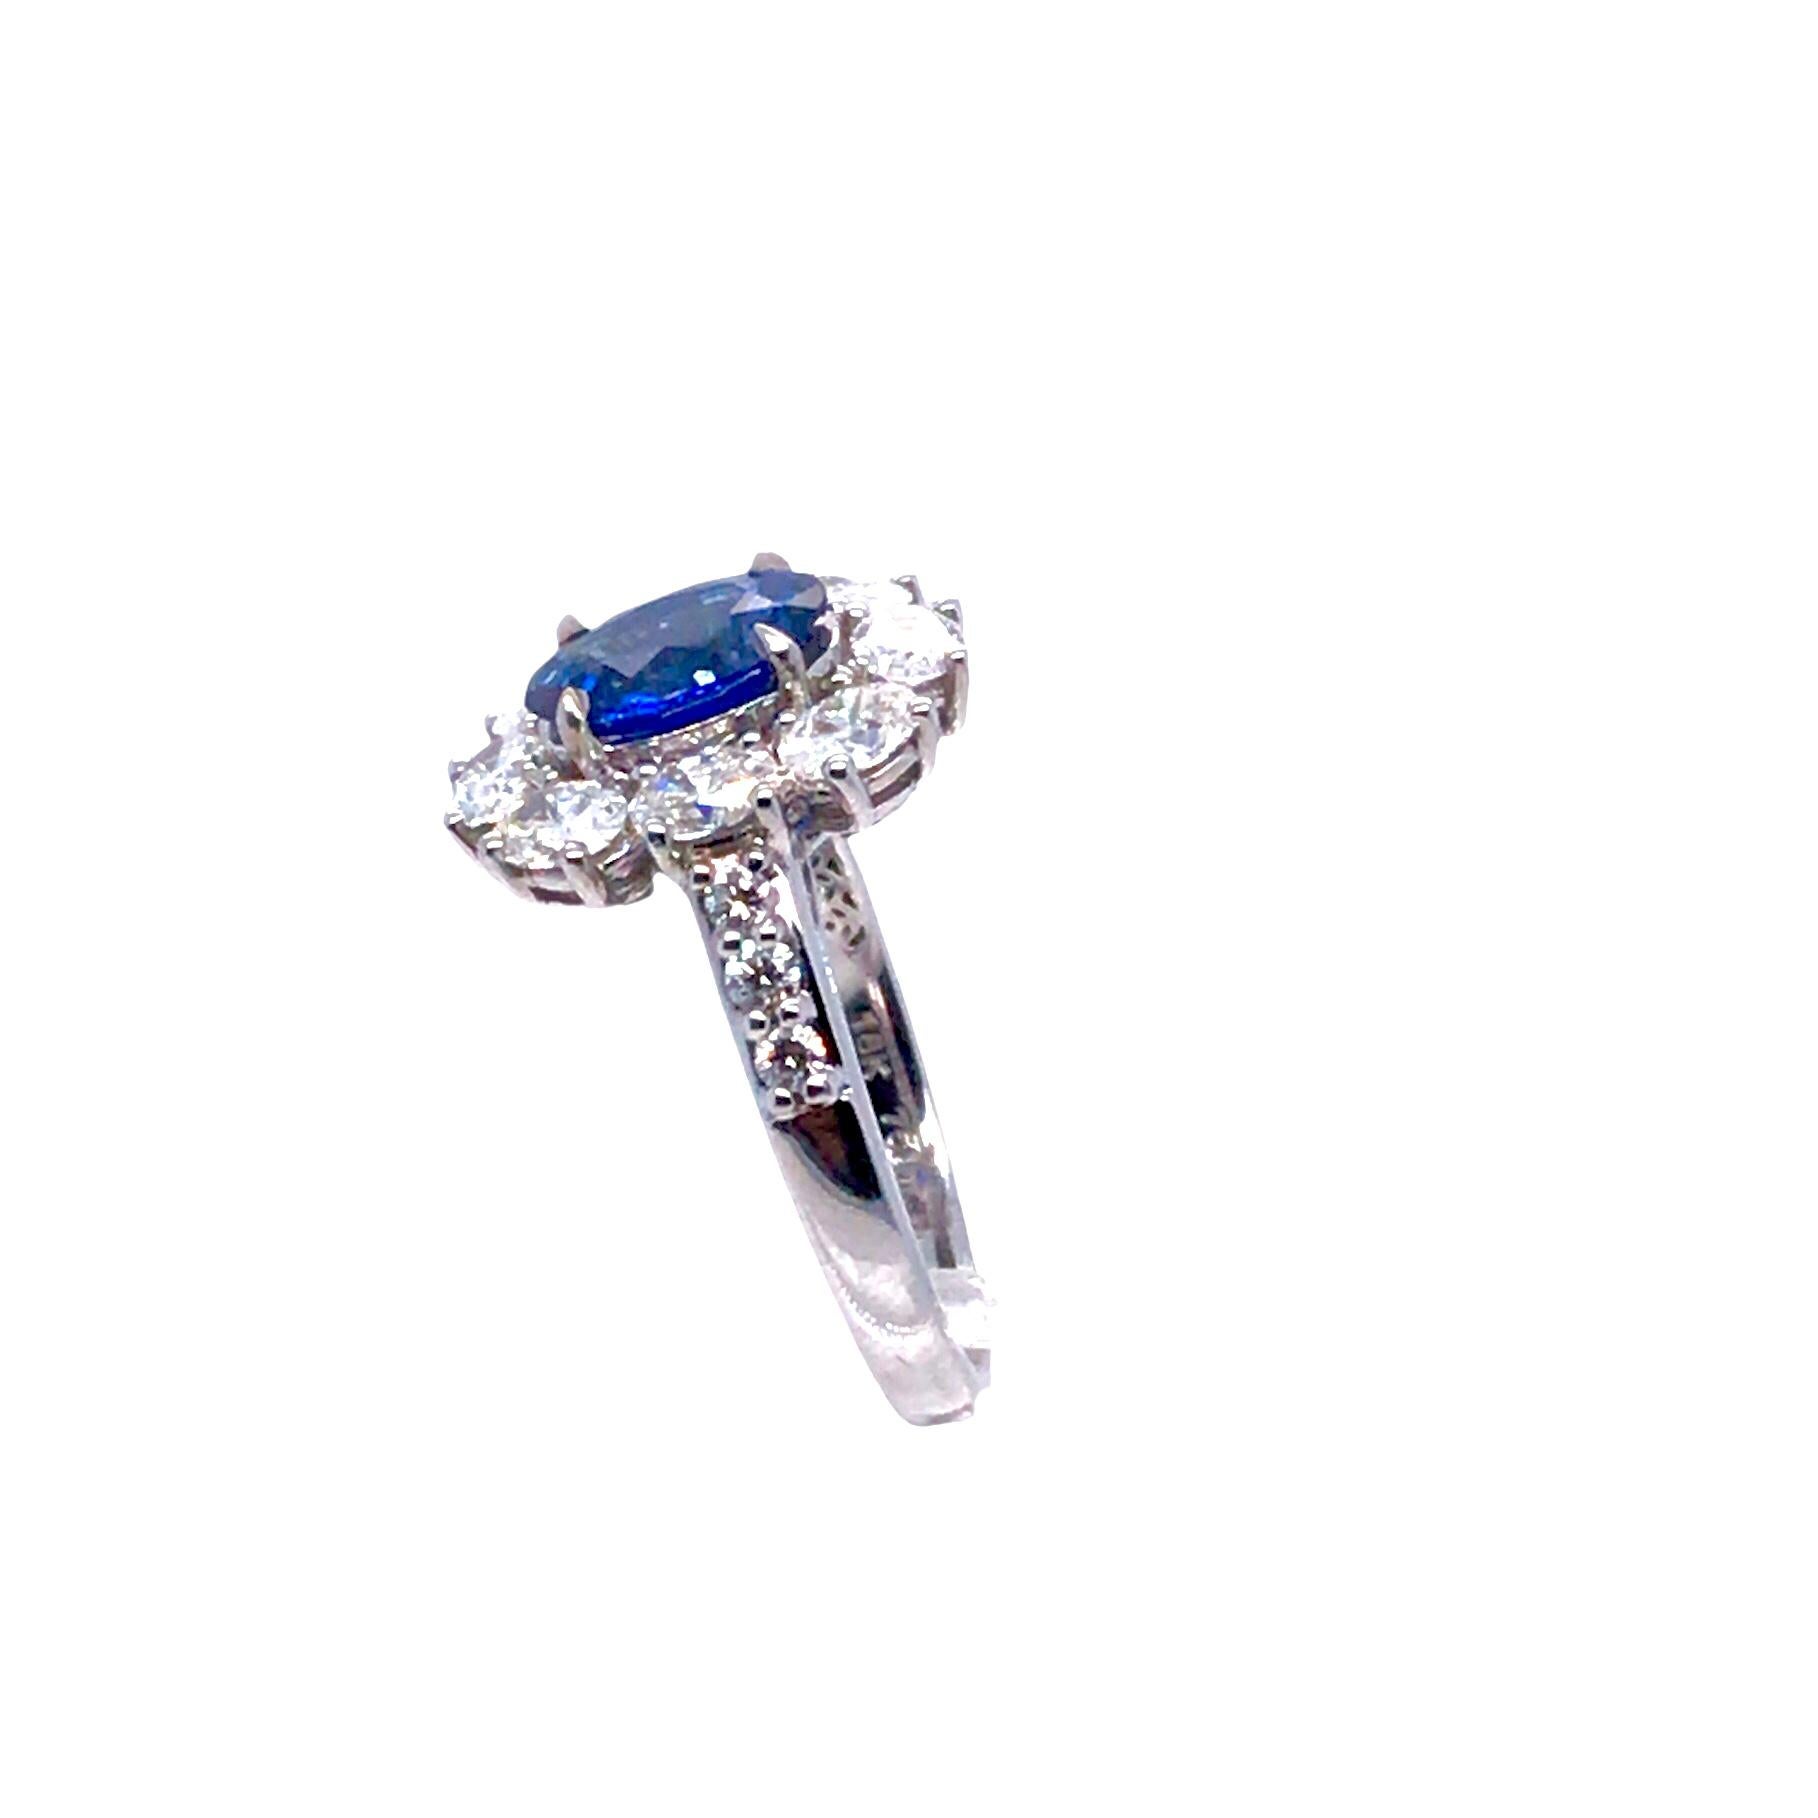 This ring showcases a 1.89 carat oval-cut Ceylon sapphire at its heart, encircled by a halo of oval-cut diamonds. The side shank is further adorned with additional round diamonds, contributing to a total diamond weight of 1.53 carats. The entire